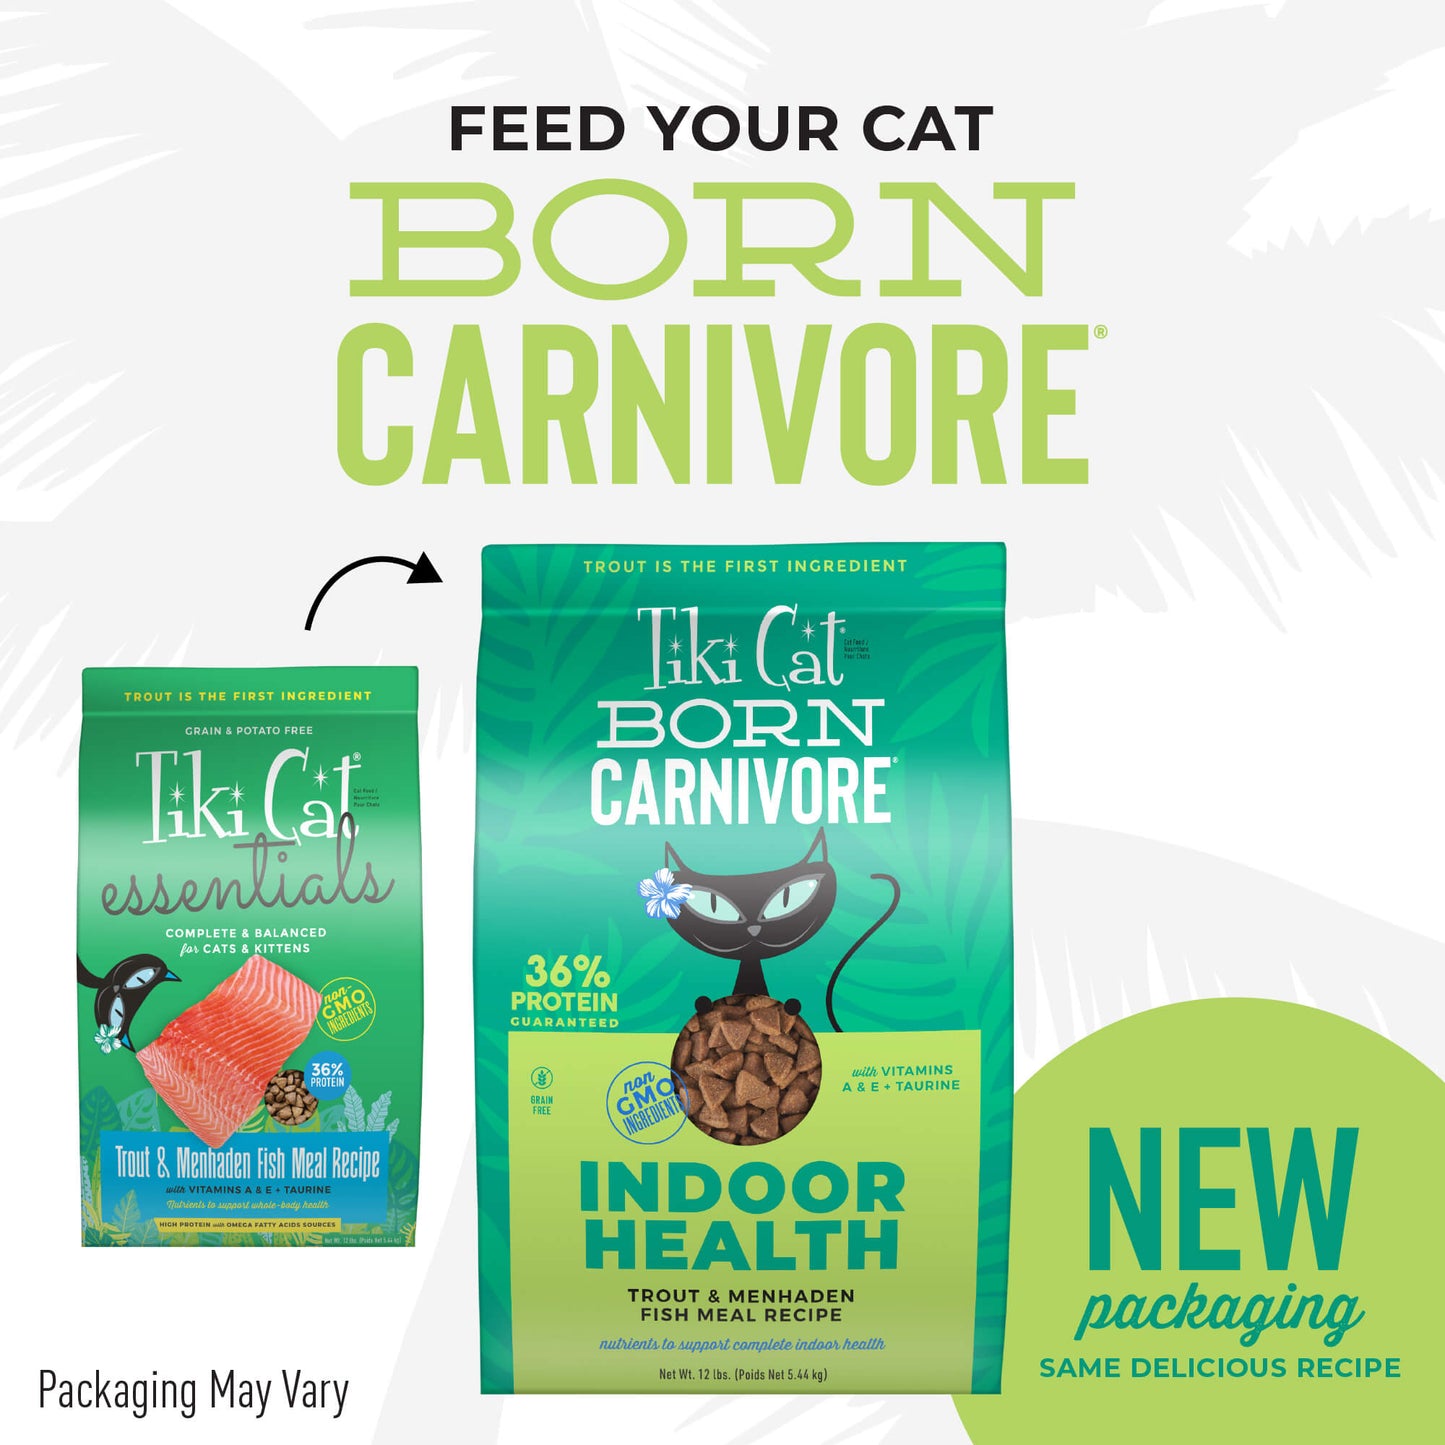 Tiki Cat® Born Carnivore™ Indoor Health: Trout and Menhaden Fish Meal Recipe Dry Food